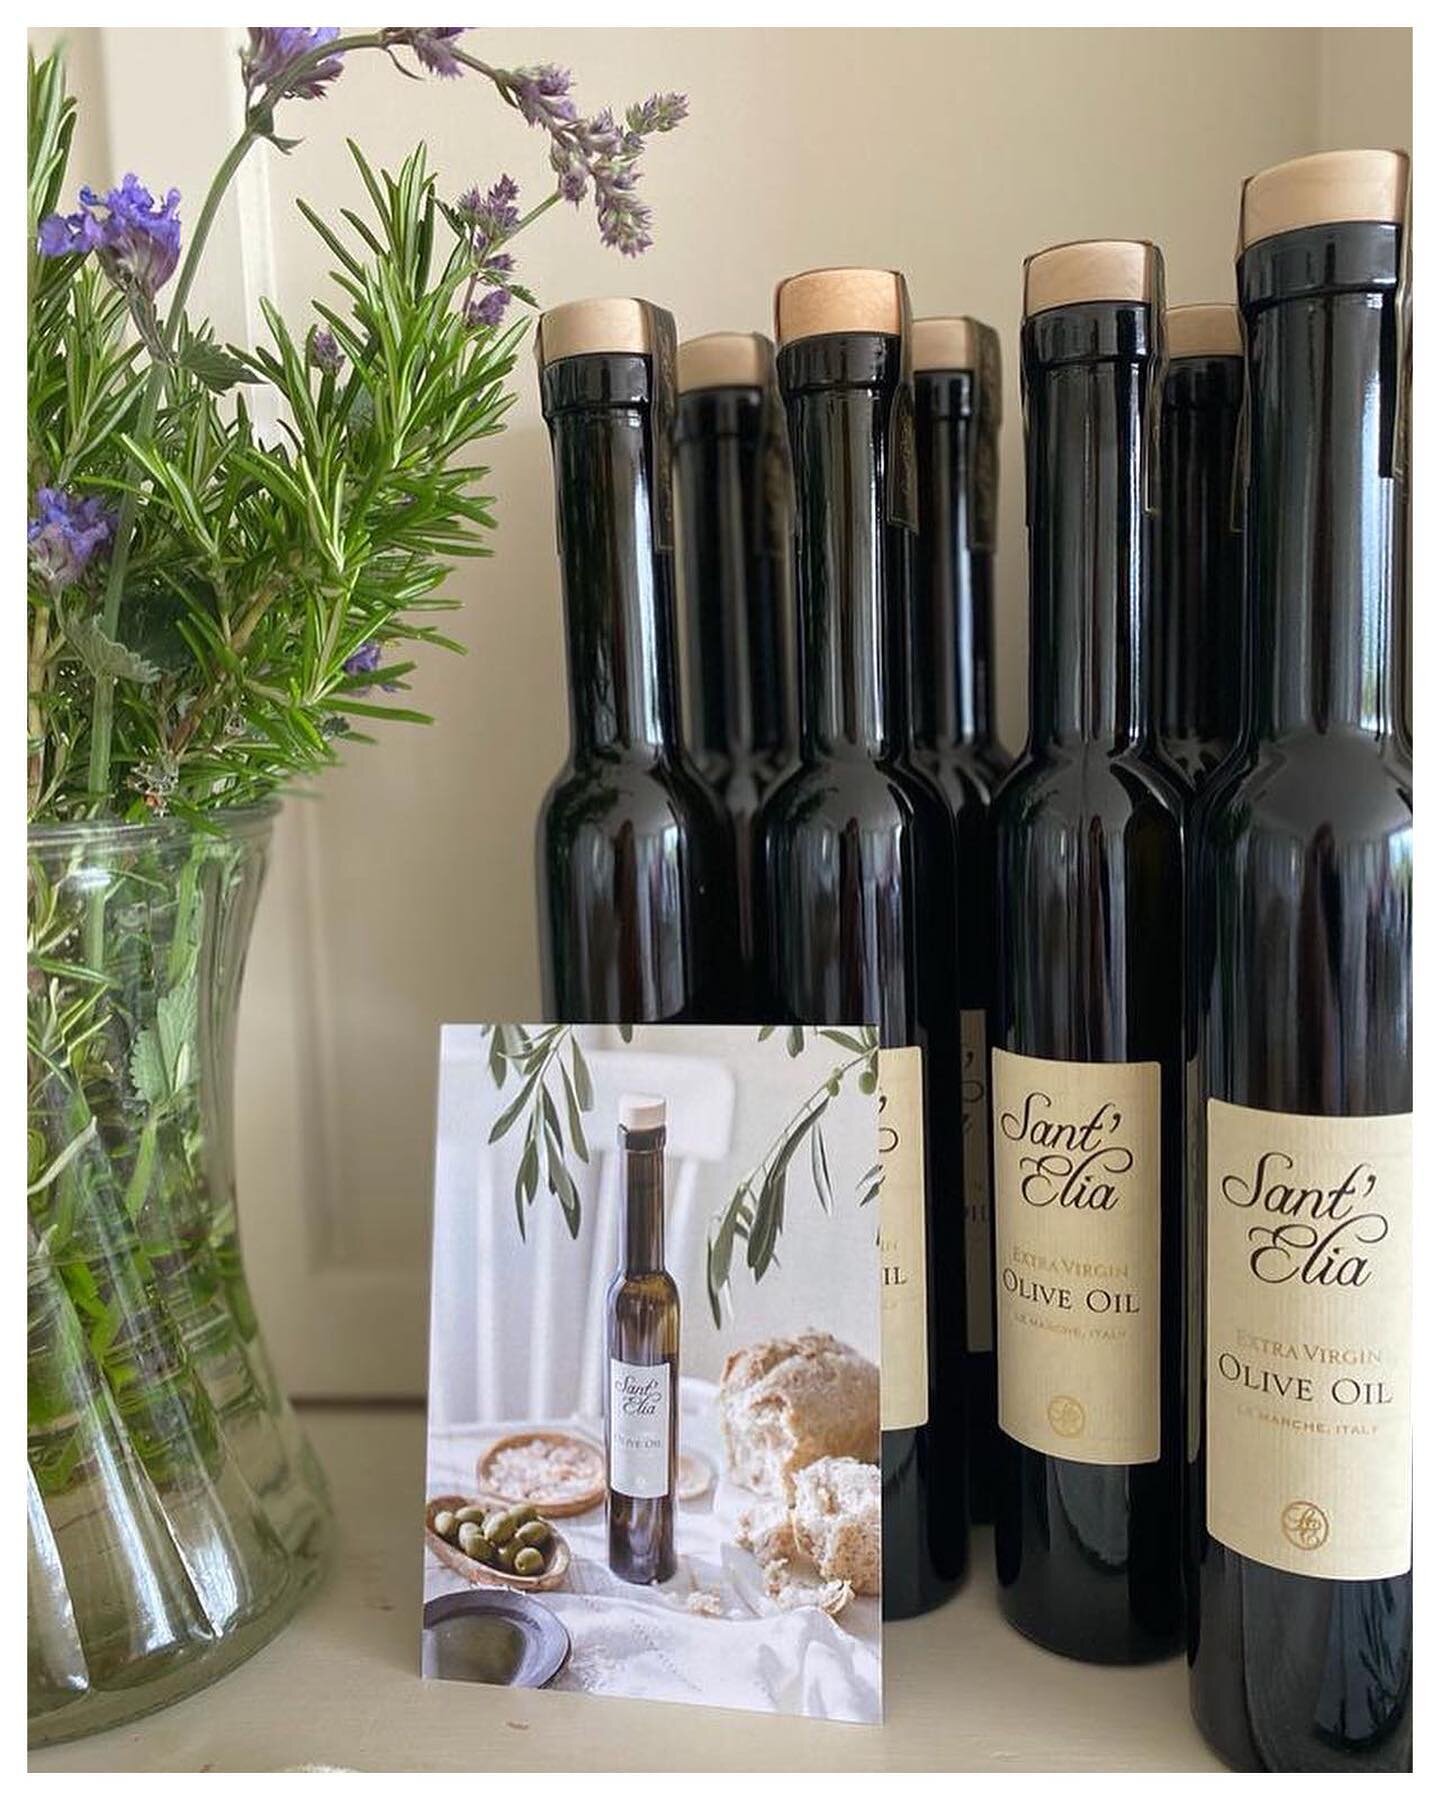 It took us so long choosing our Extra Olive Oil bottles, and even longer with the label design!

We wanted something that wouldn&rsquo;t date, something elegant and of high quality.
I think we did it&hellip;we have so many compliments on our branding